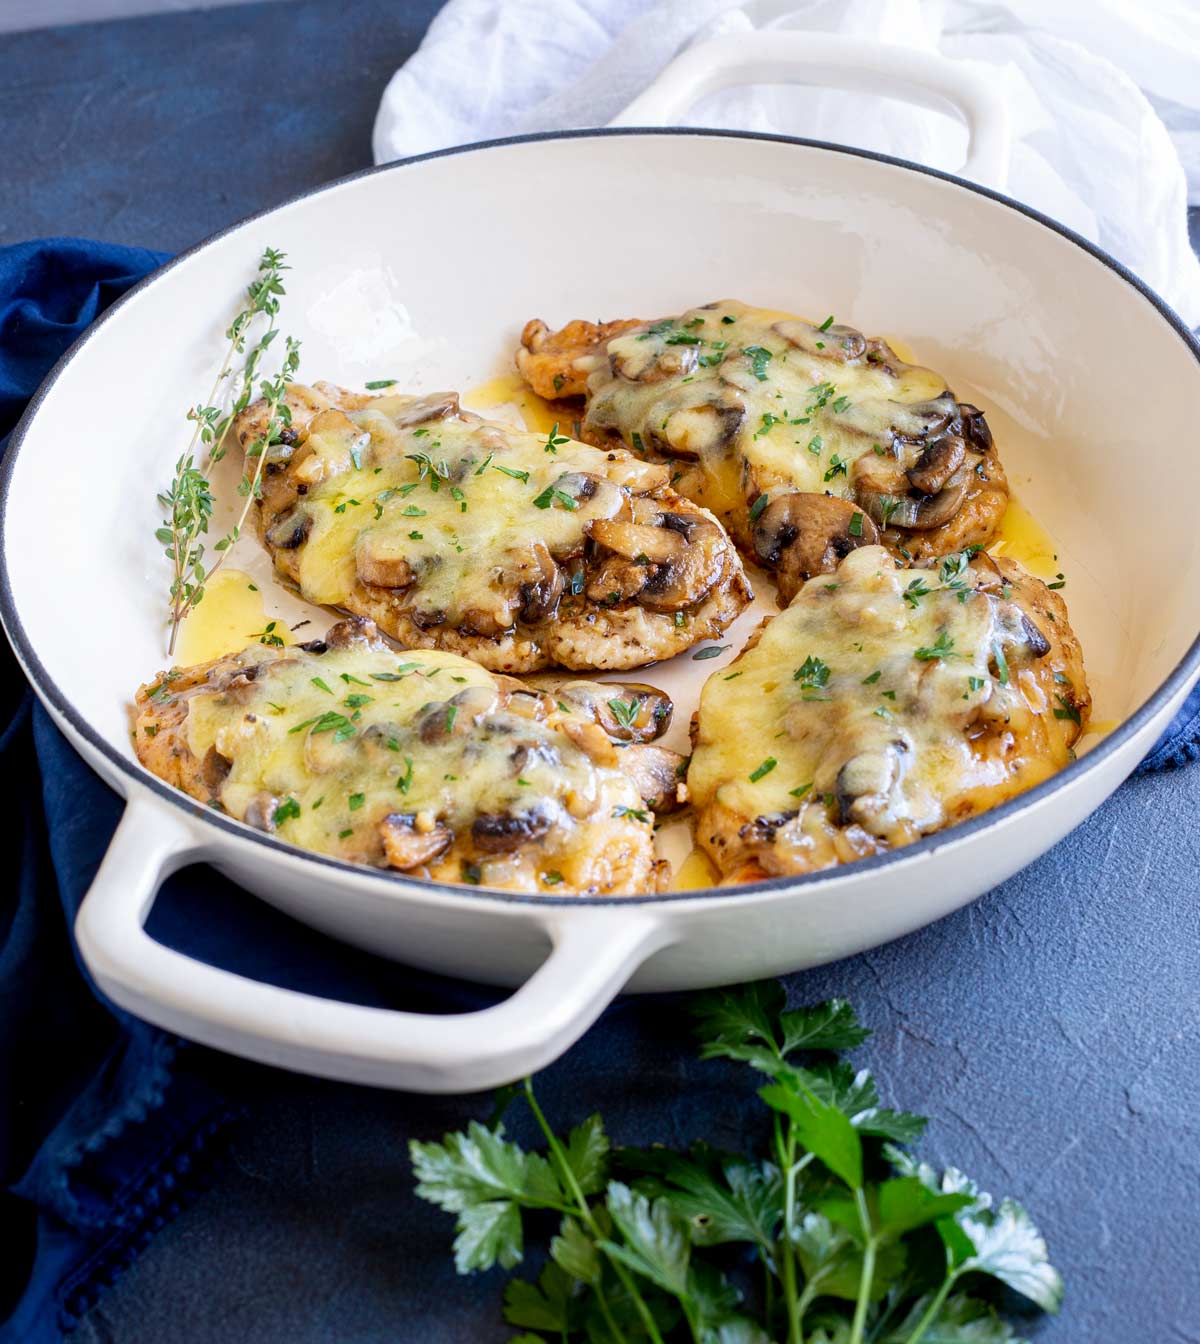 4 chicken breast fillets with mushrooms and cheese in a dish on a blue table